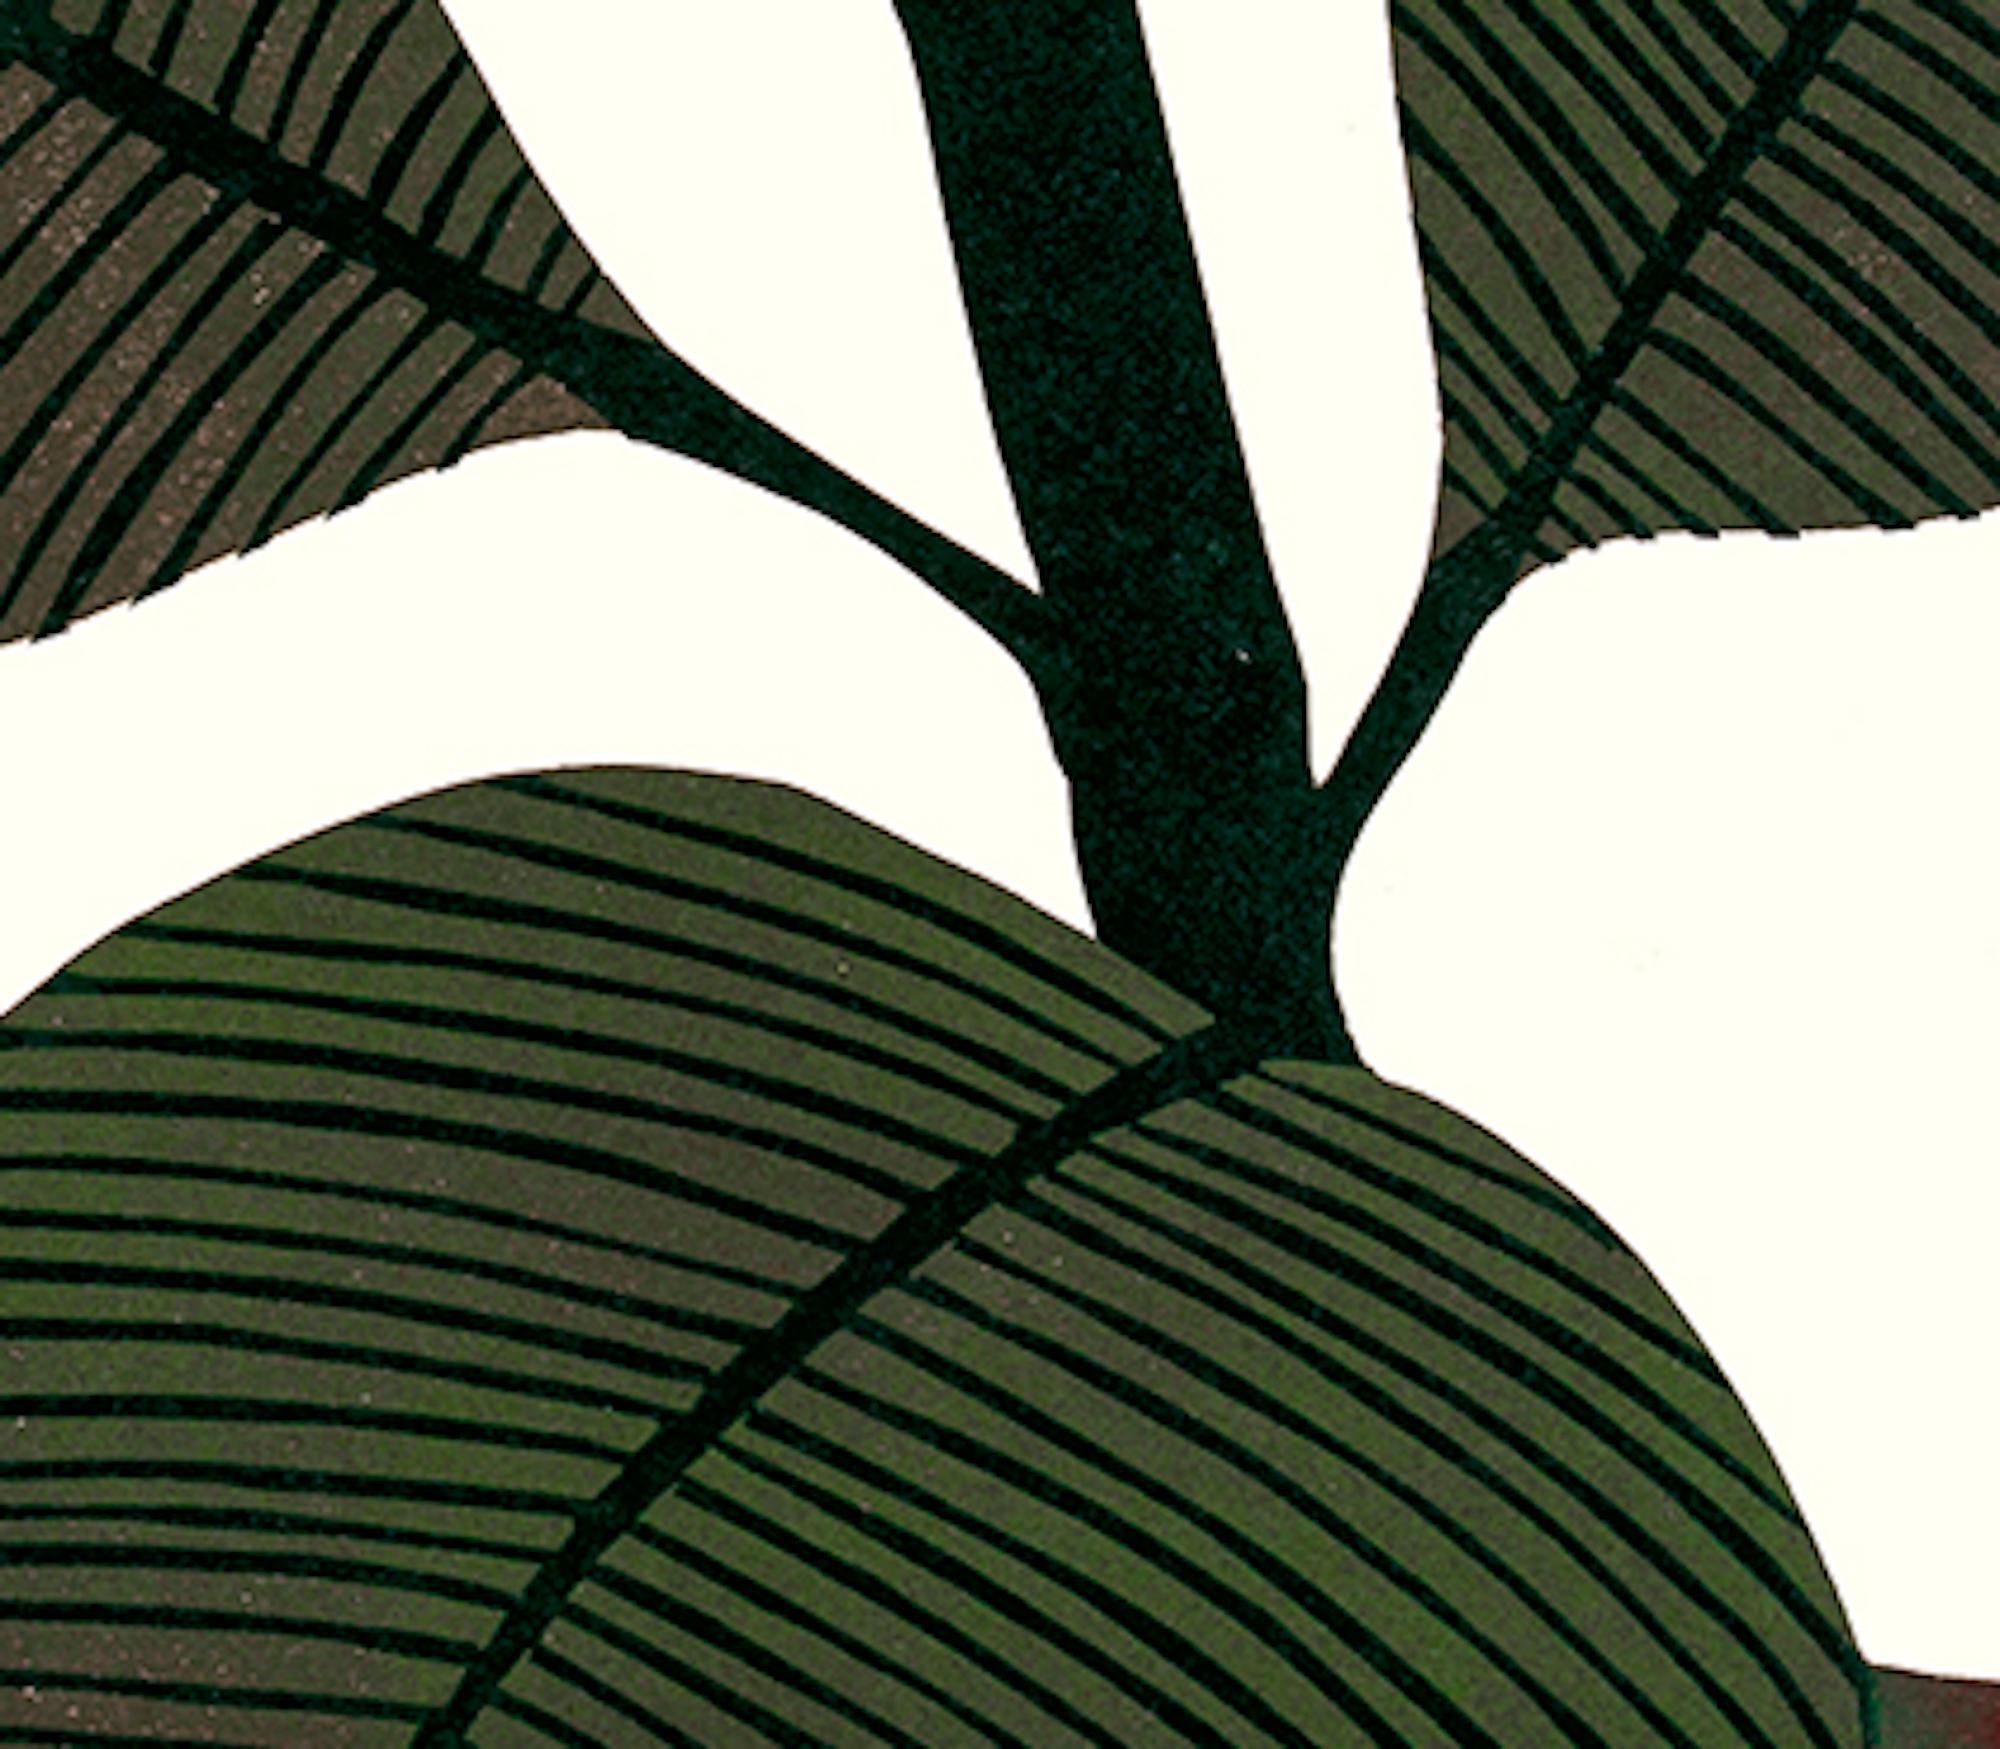 'Rubber Plant III' is a multi layered reduction Lino Print in a varied edition of 10. Based on Kerry's love of her house plants, she wanted to depict the subtle pattern in the rubber plant leaves and their bold architectural form.

Kerry Day's